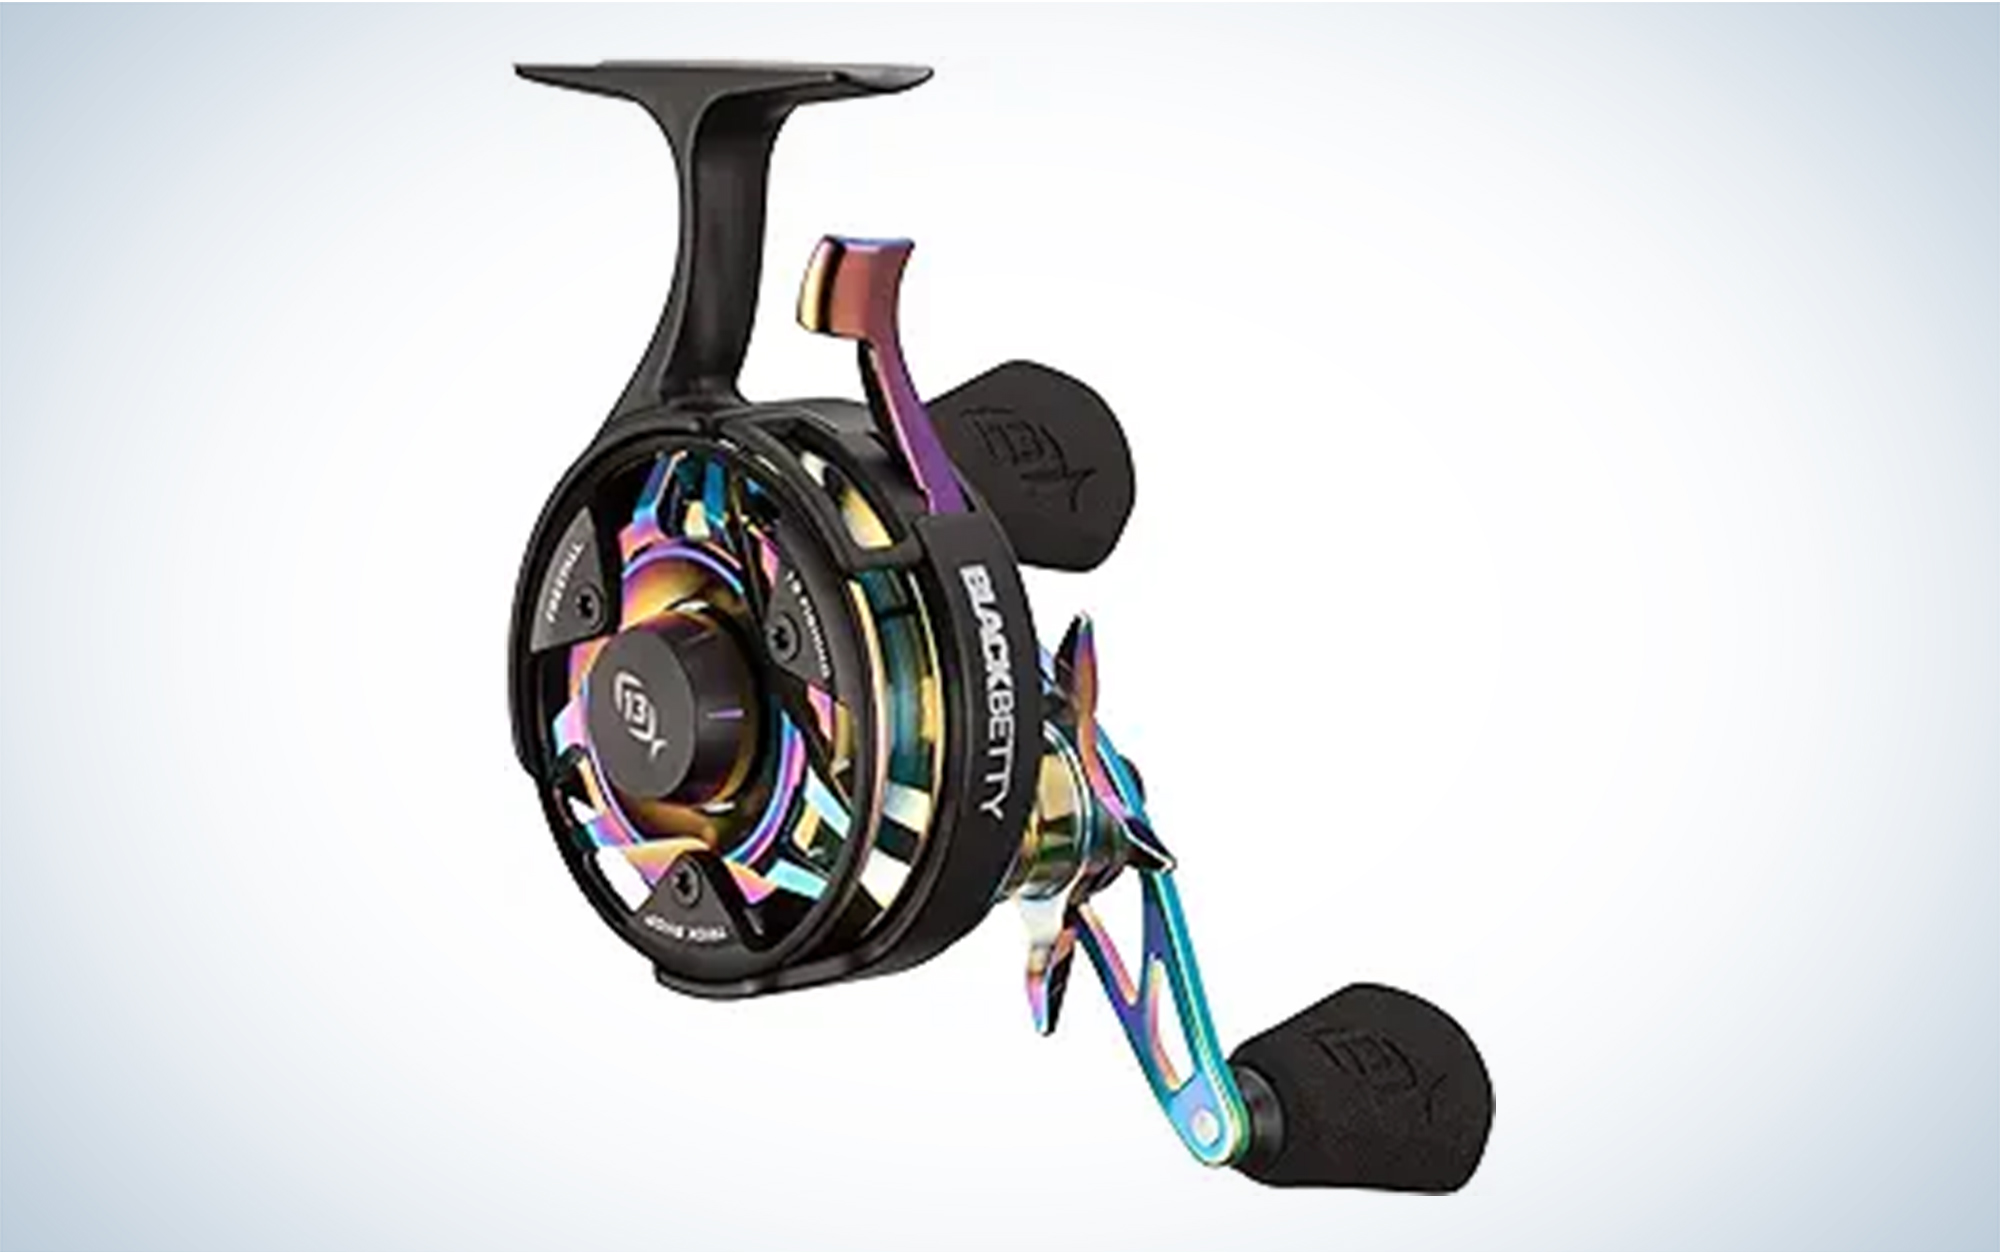 Ice Fishing Reels: Find The best Rated Fishing Reels In My Reviews